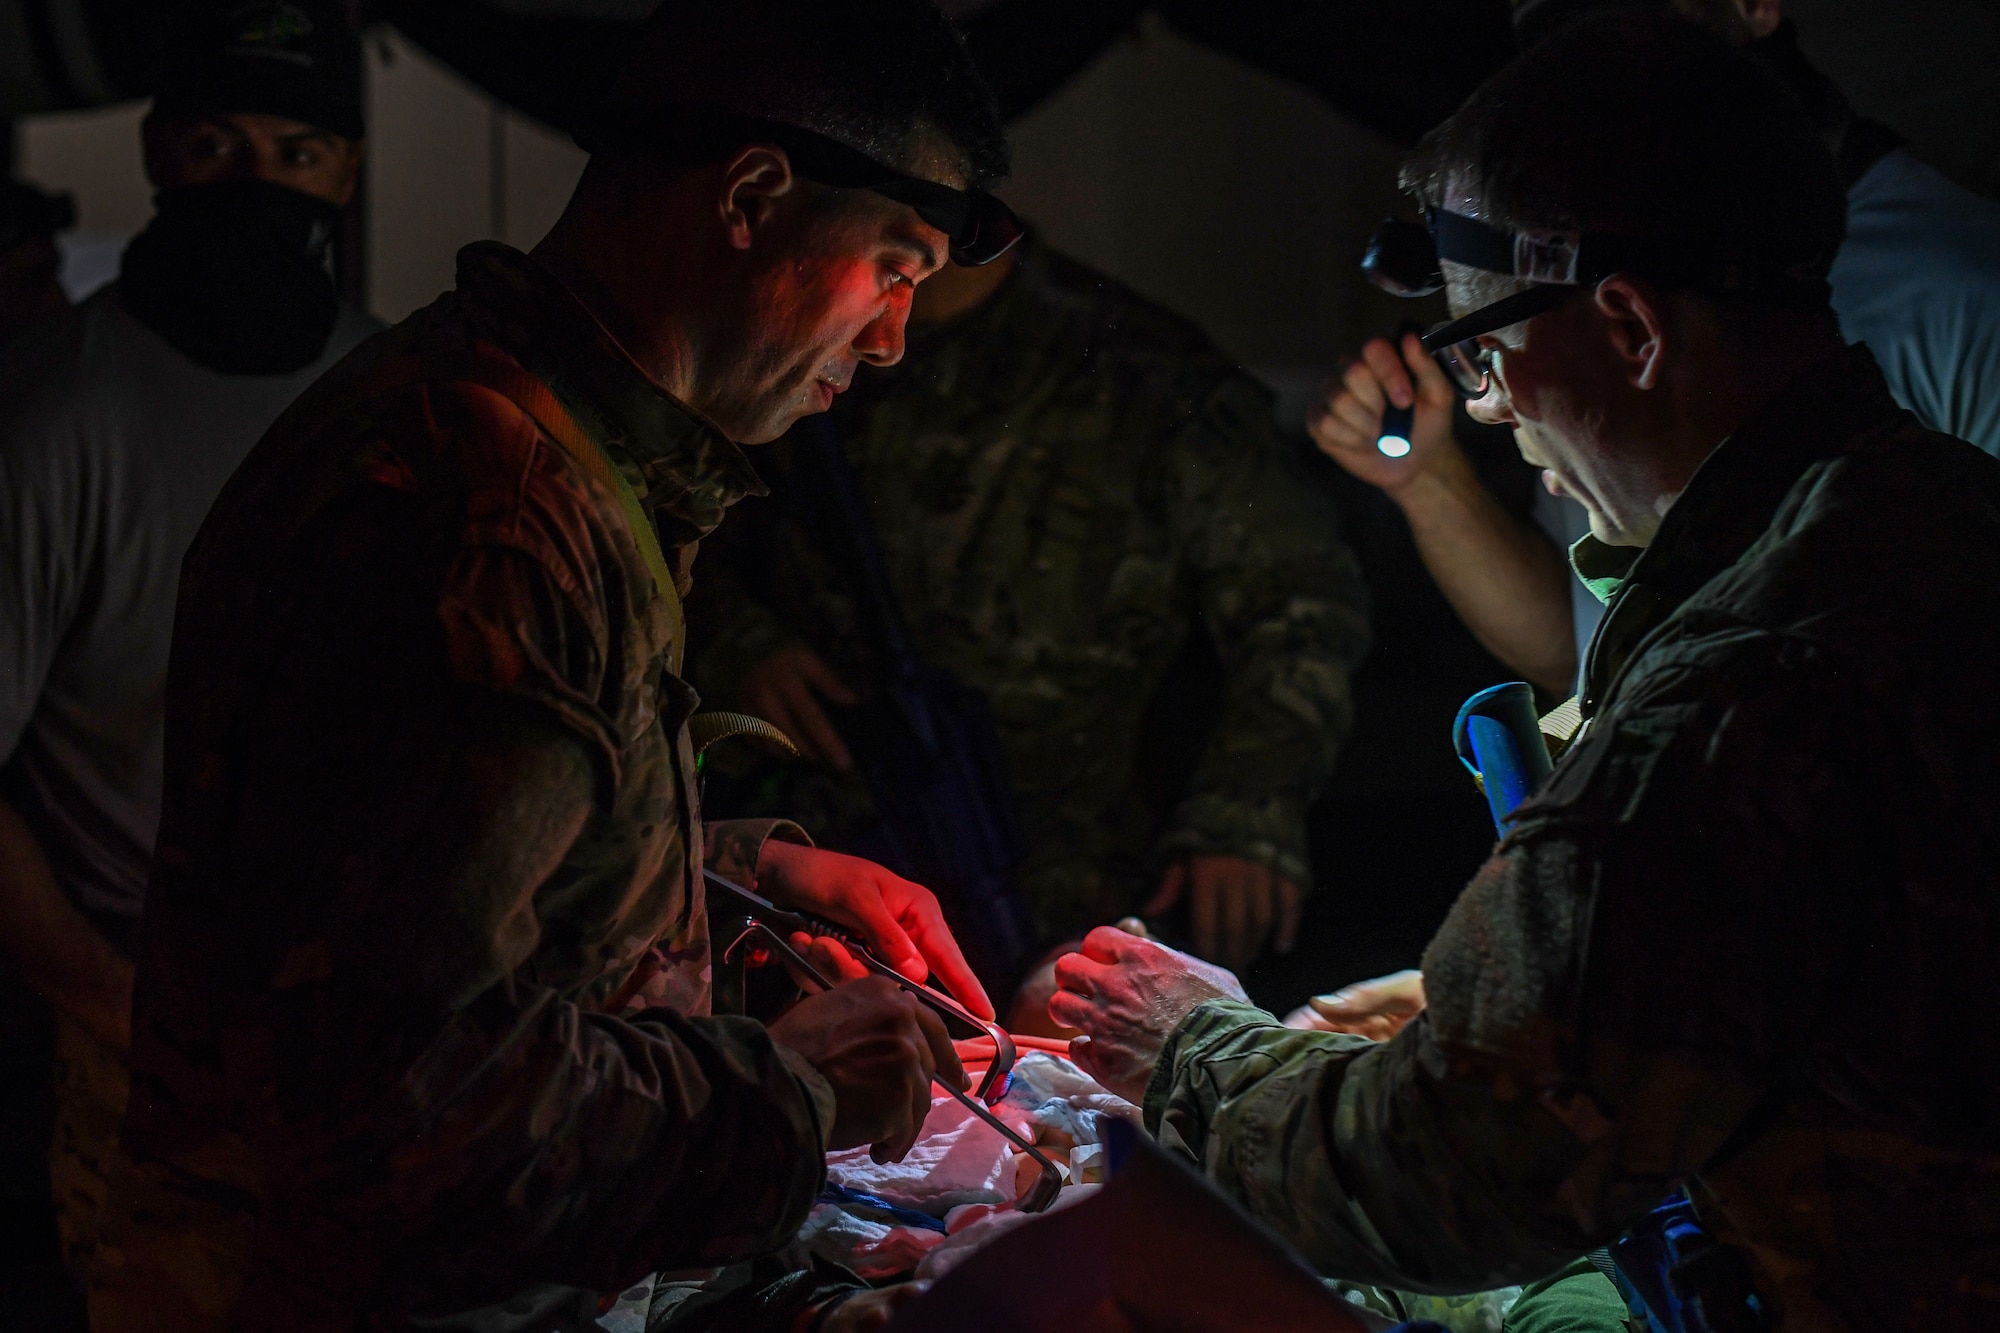 Special Operations Surgical Team candidates participate in a medical scenario operating on a subject in low light